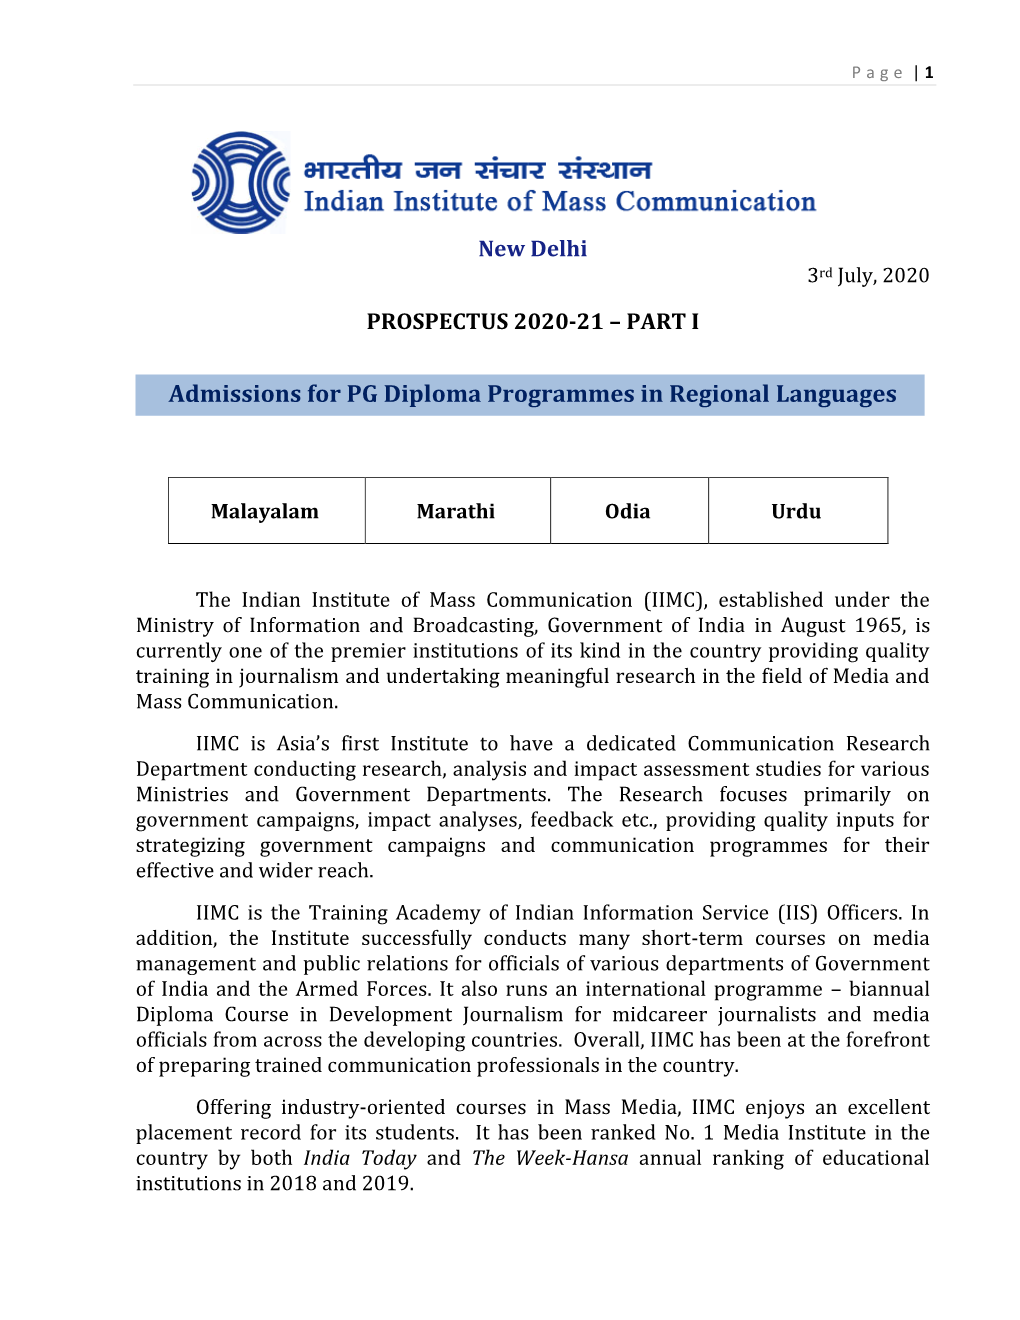 Admissions for PG Diploma Programmes in Regional Languages